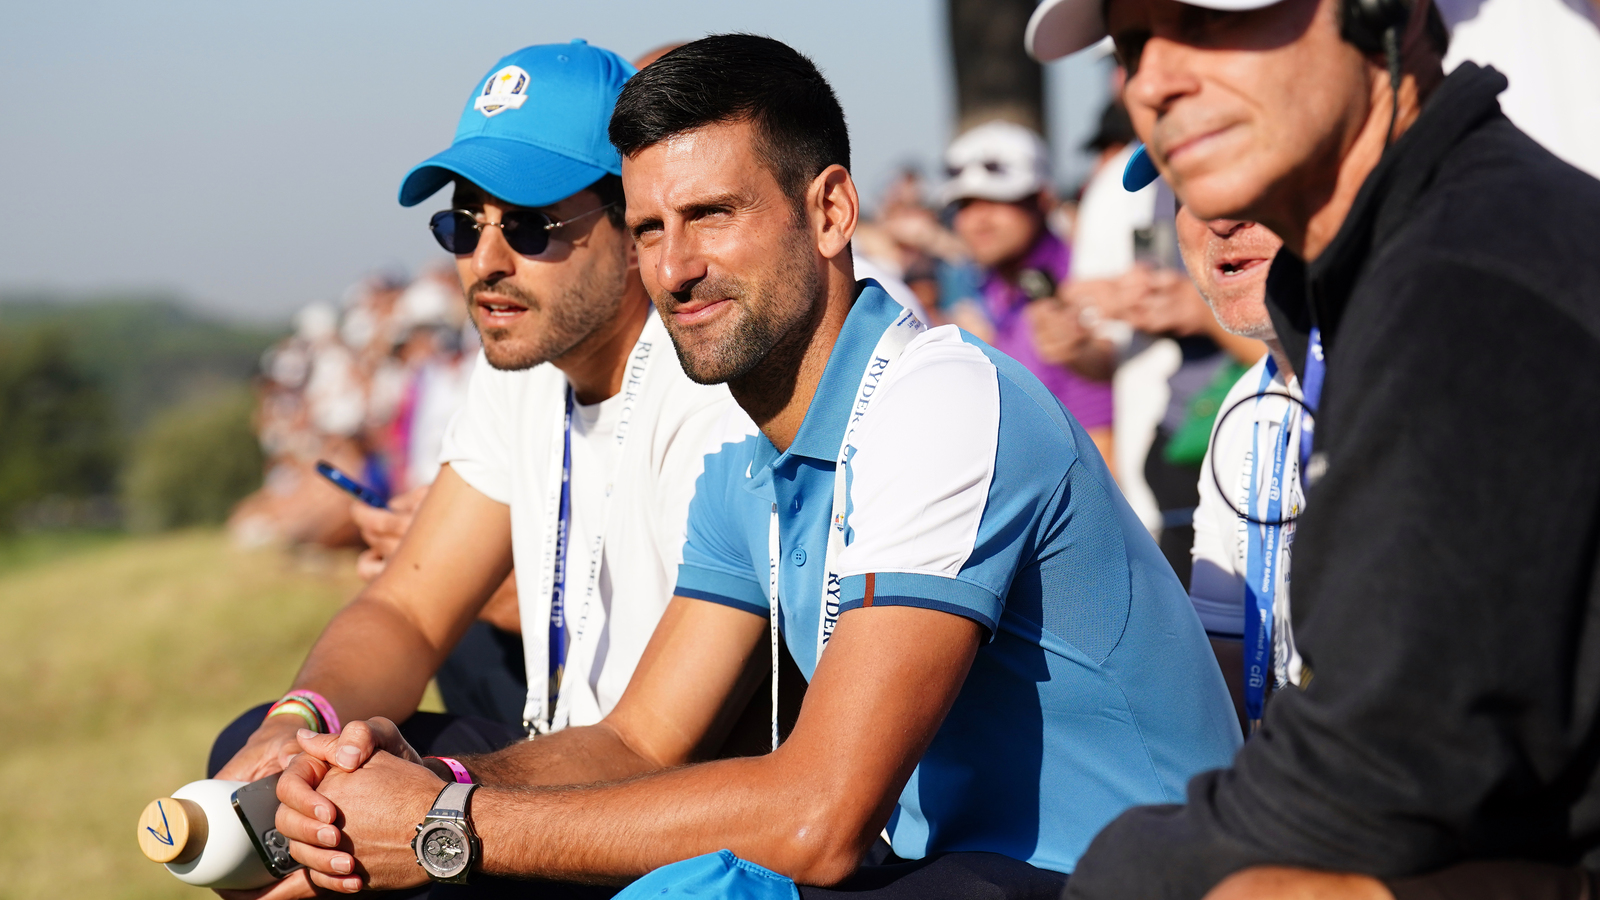 Djokovic 'Without A Doubt Favourite At Australian Open' Thanks To 'Incredibly Professional' Approach